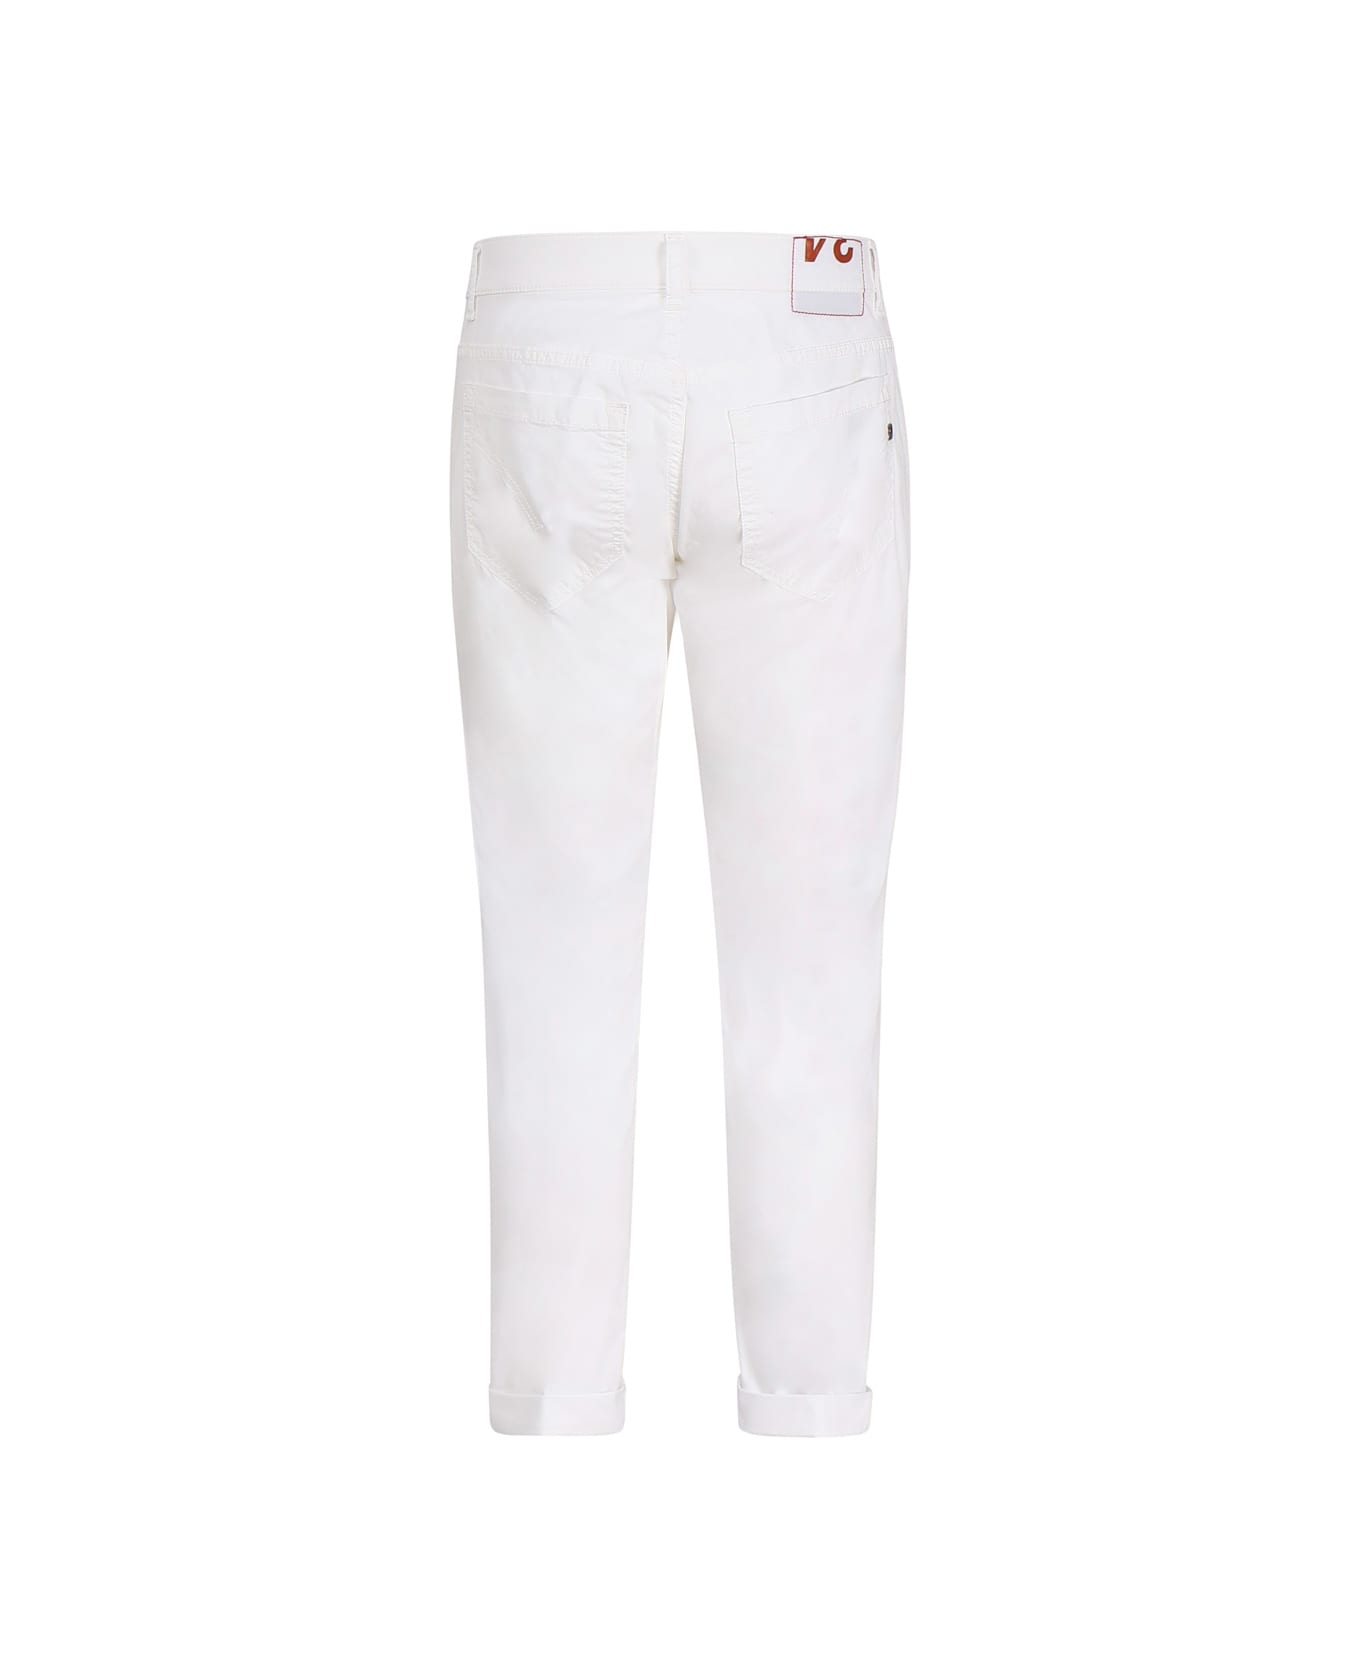 Dondup Straight Jeans - White